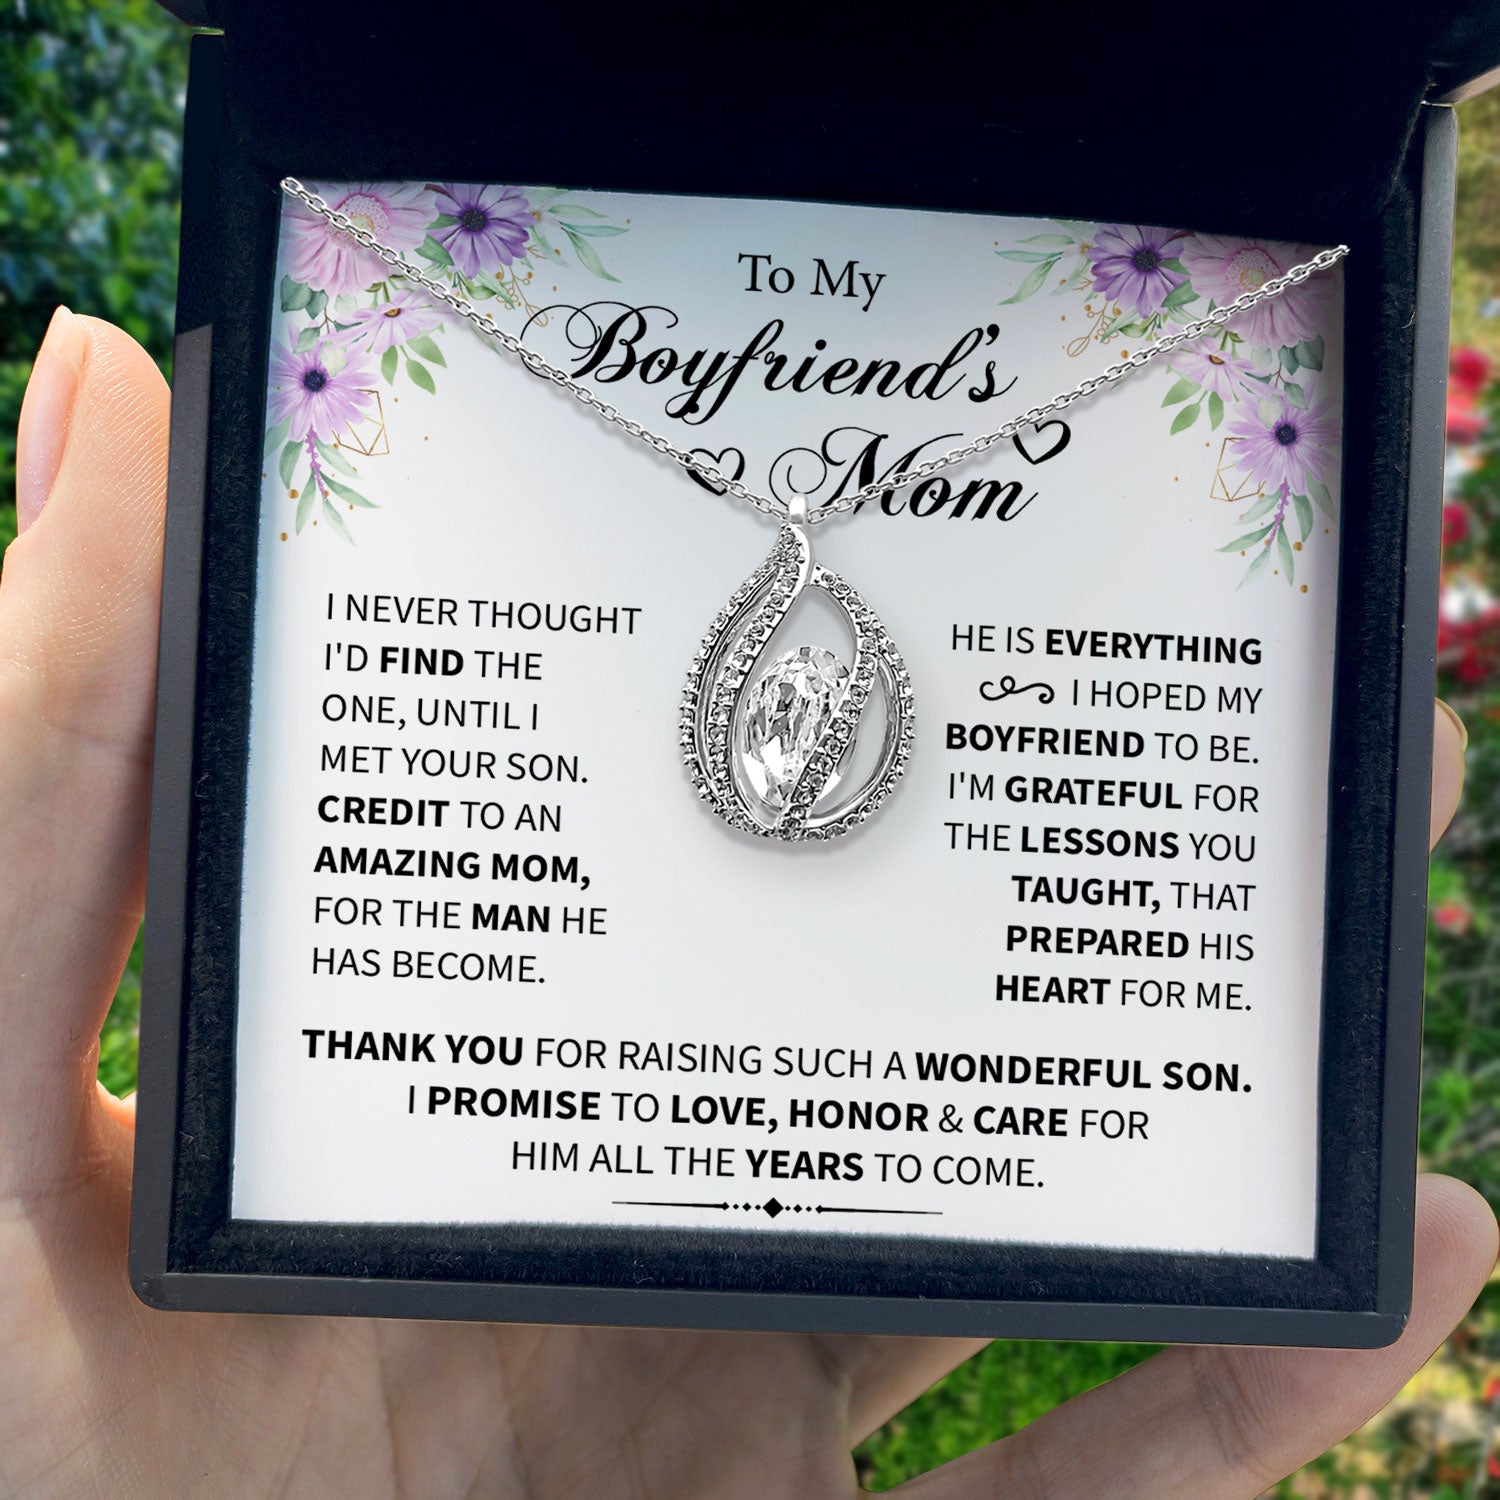 To My Boyfriend's Mom - I'm Grateful For The Lessons You Taught - Orbital Birdcage Necklace